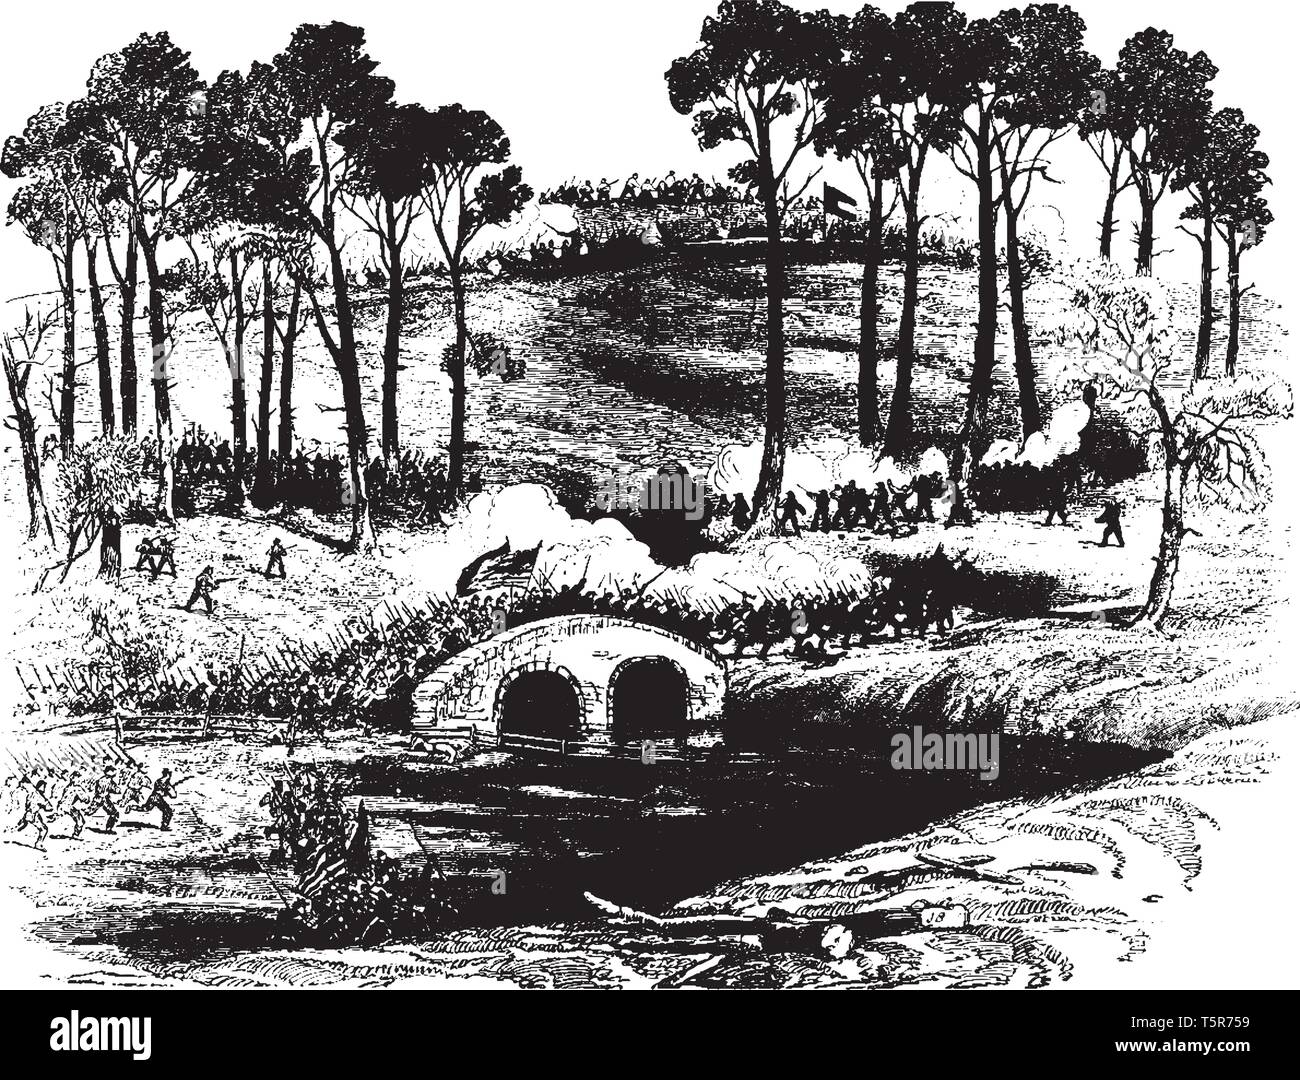 Battle of Antietam also known as the Battle of Sharpsburg particularly in the Southern United States, vintage line drawing or engraving illustration. Stock Vector